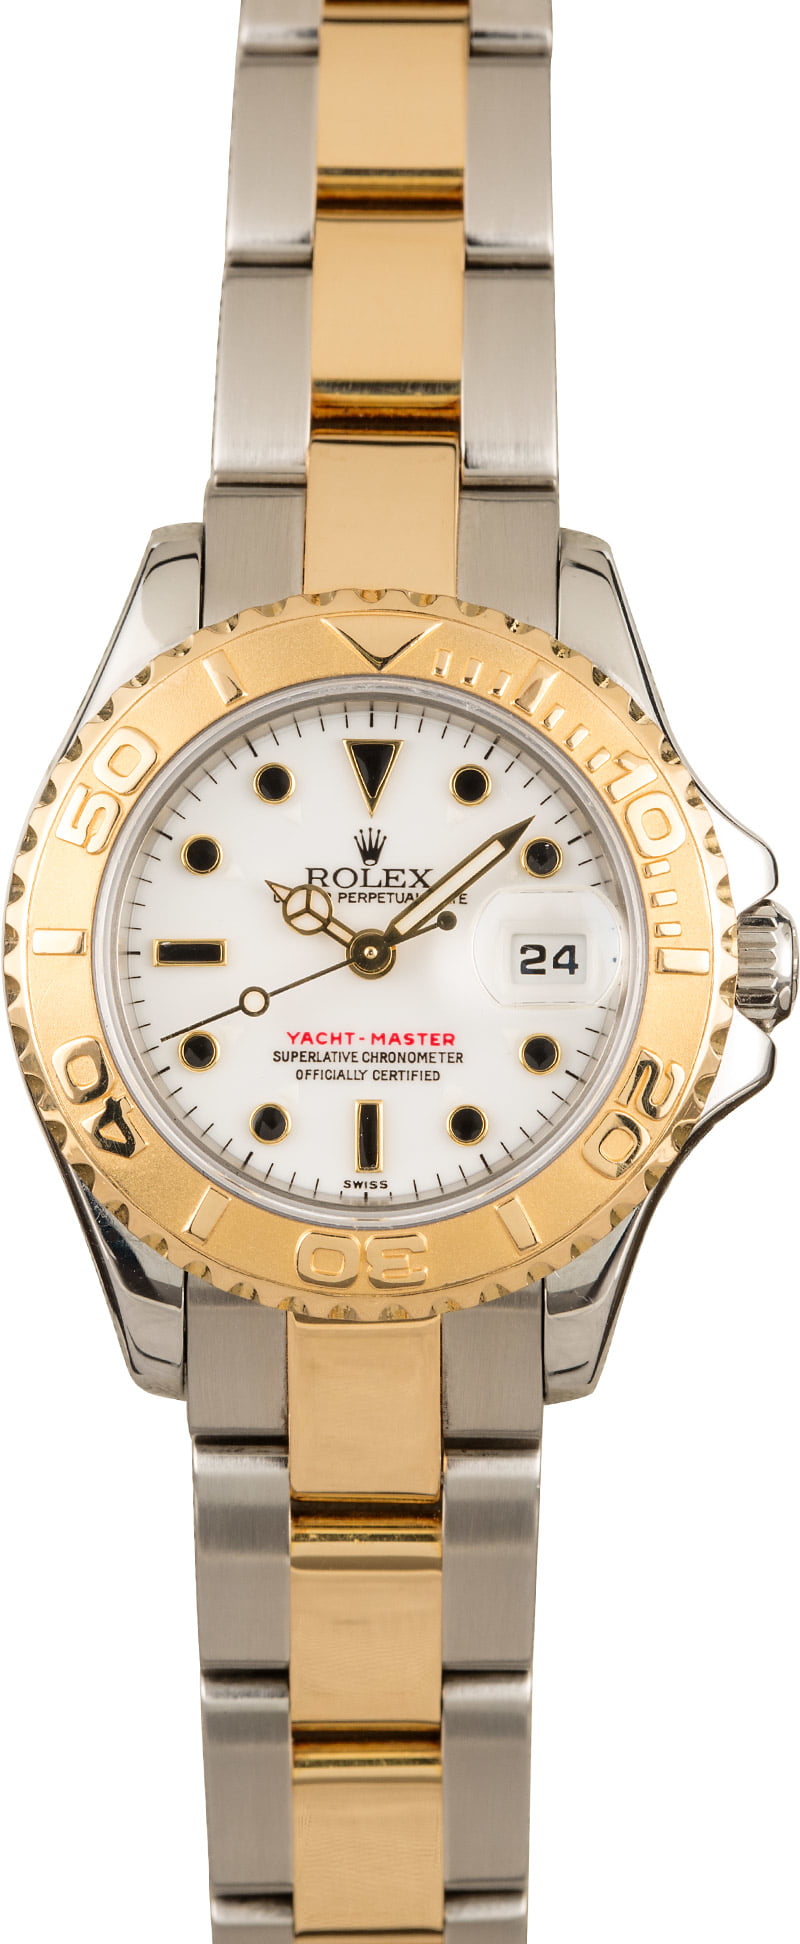 Buy Used Rolex 69623 | Bob's Watches 